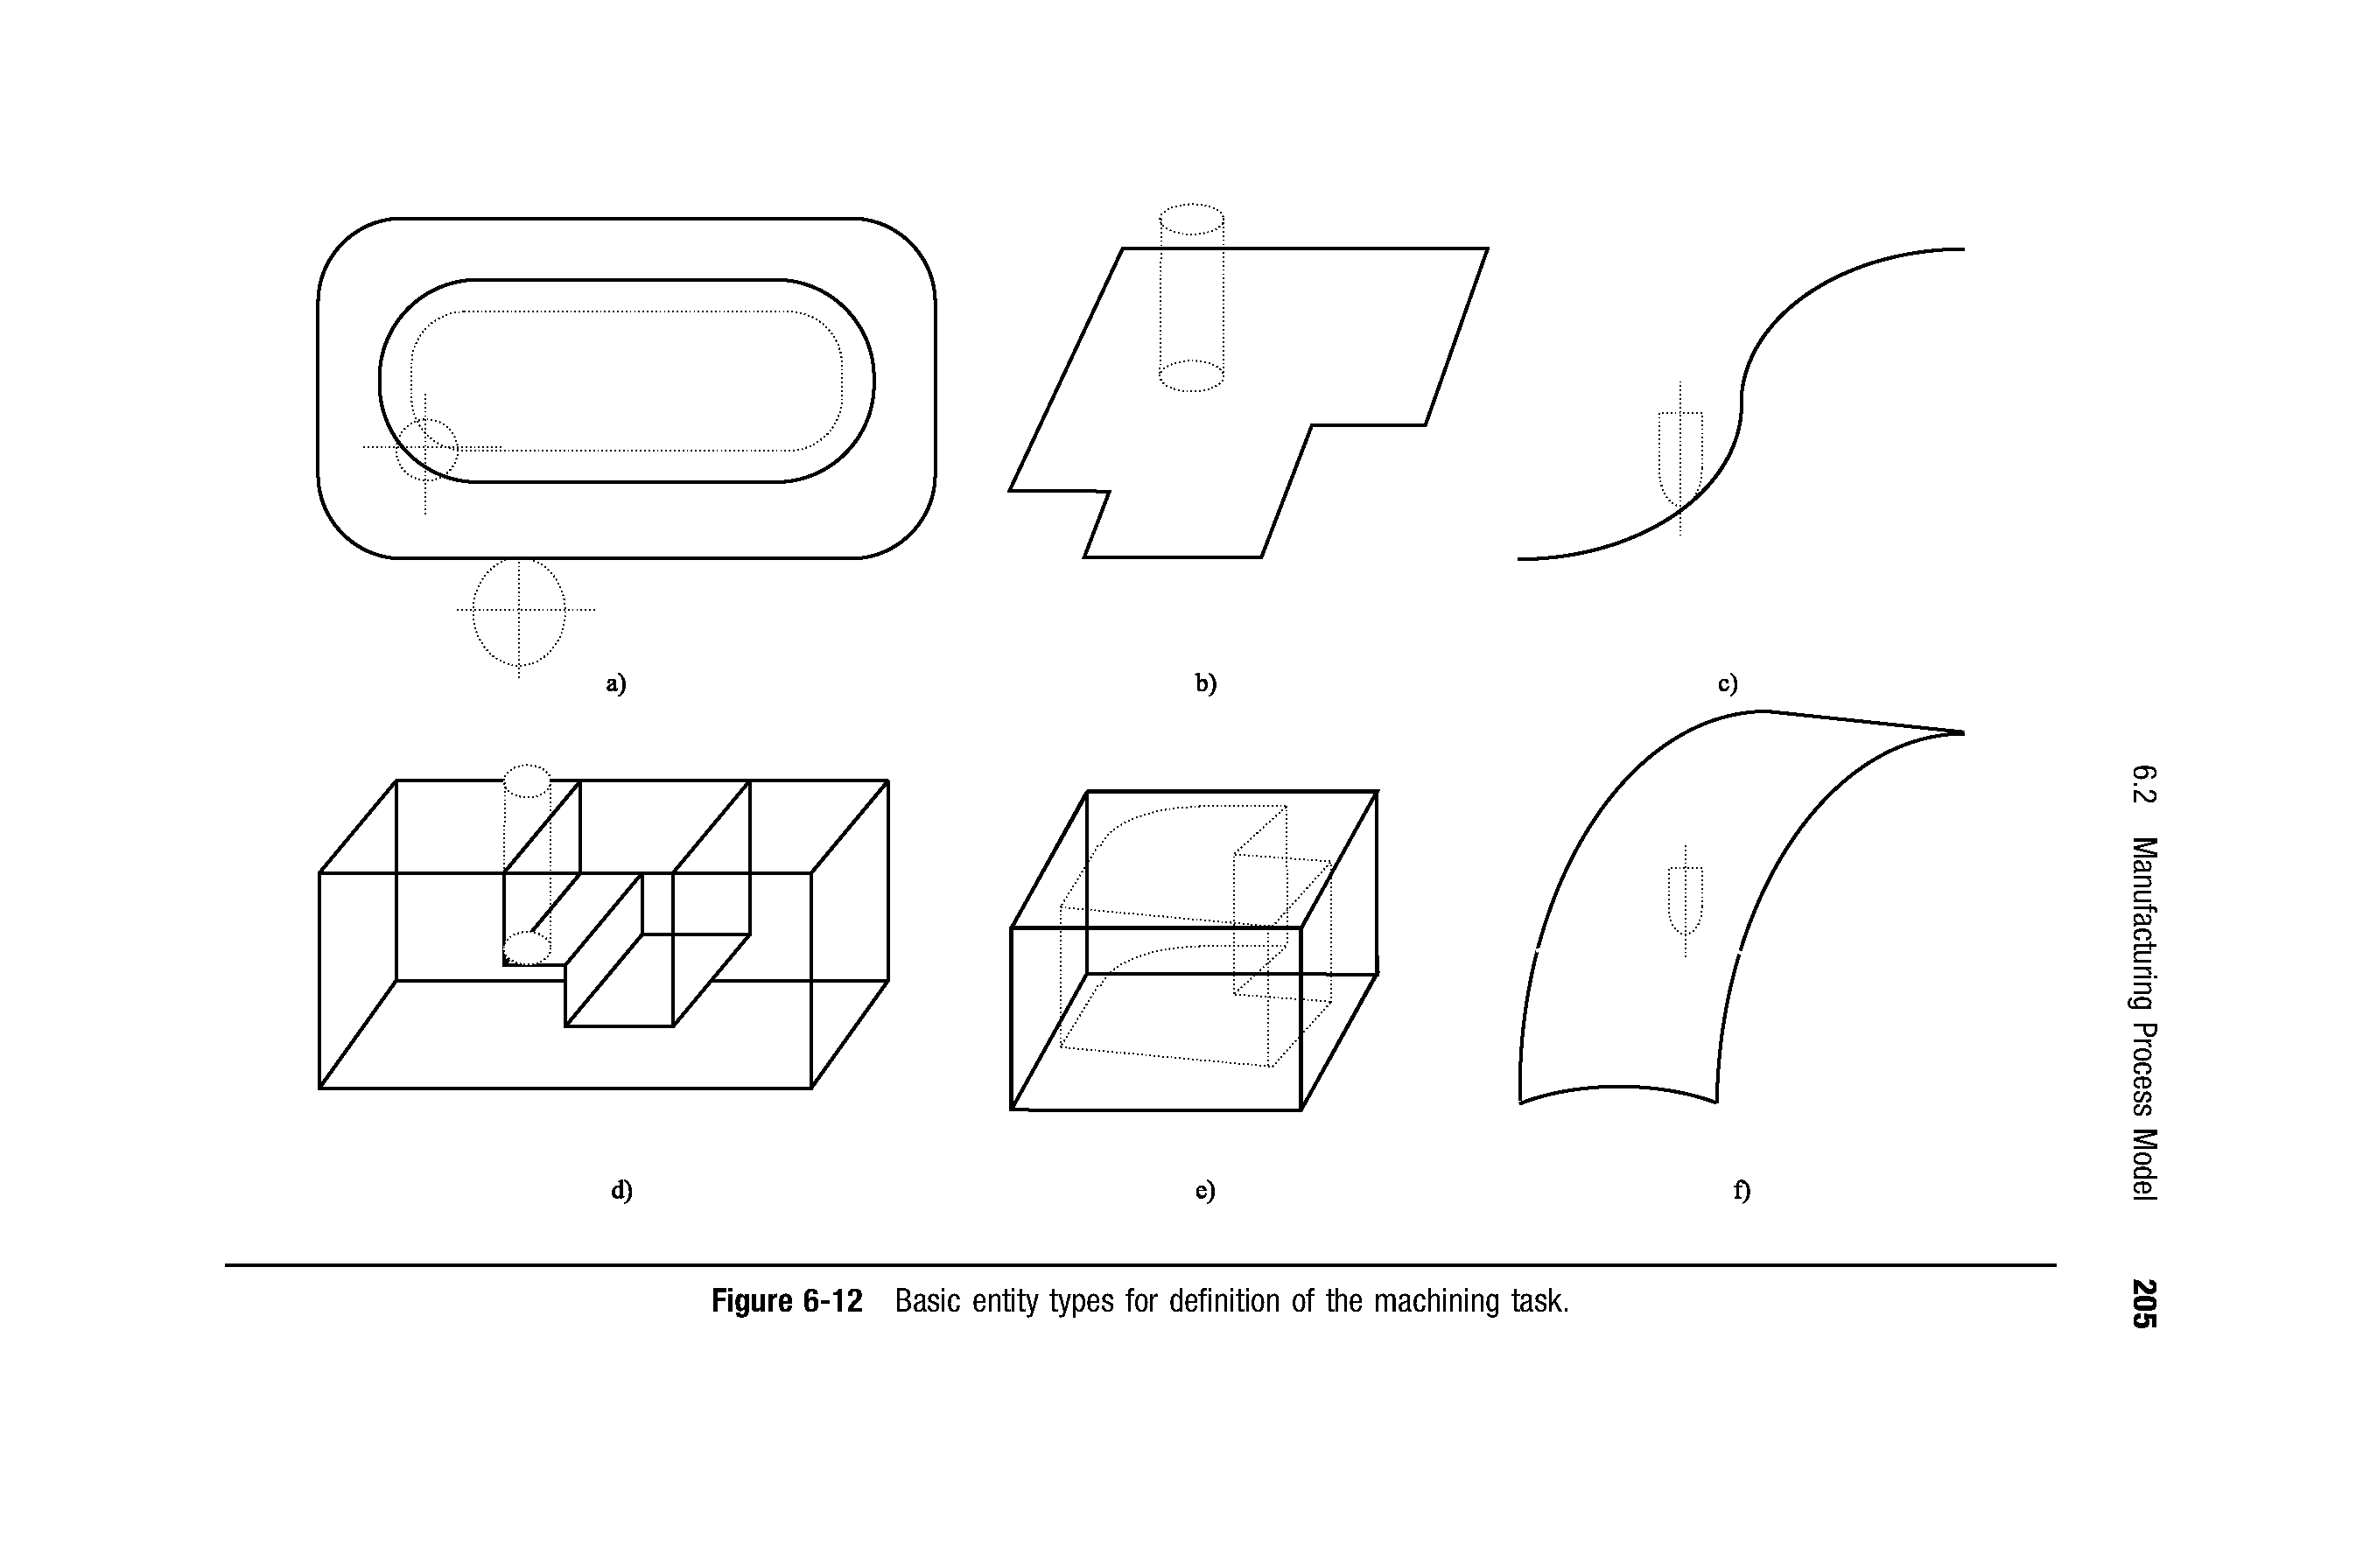 Figure 6-12 Basic entity types for definition of the machining task.